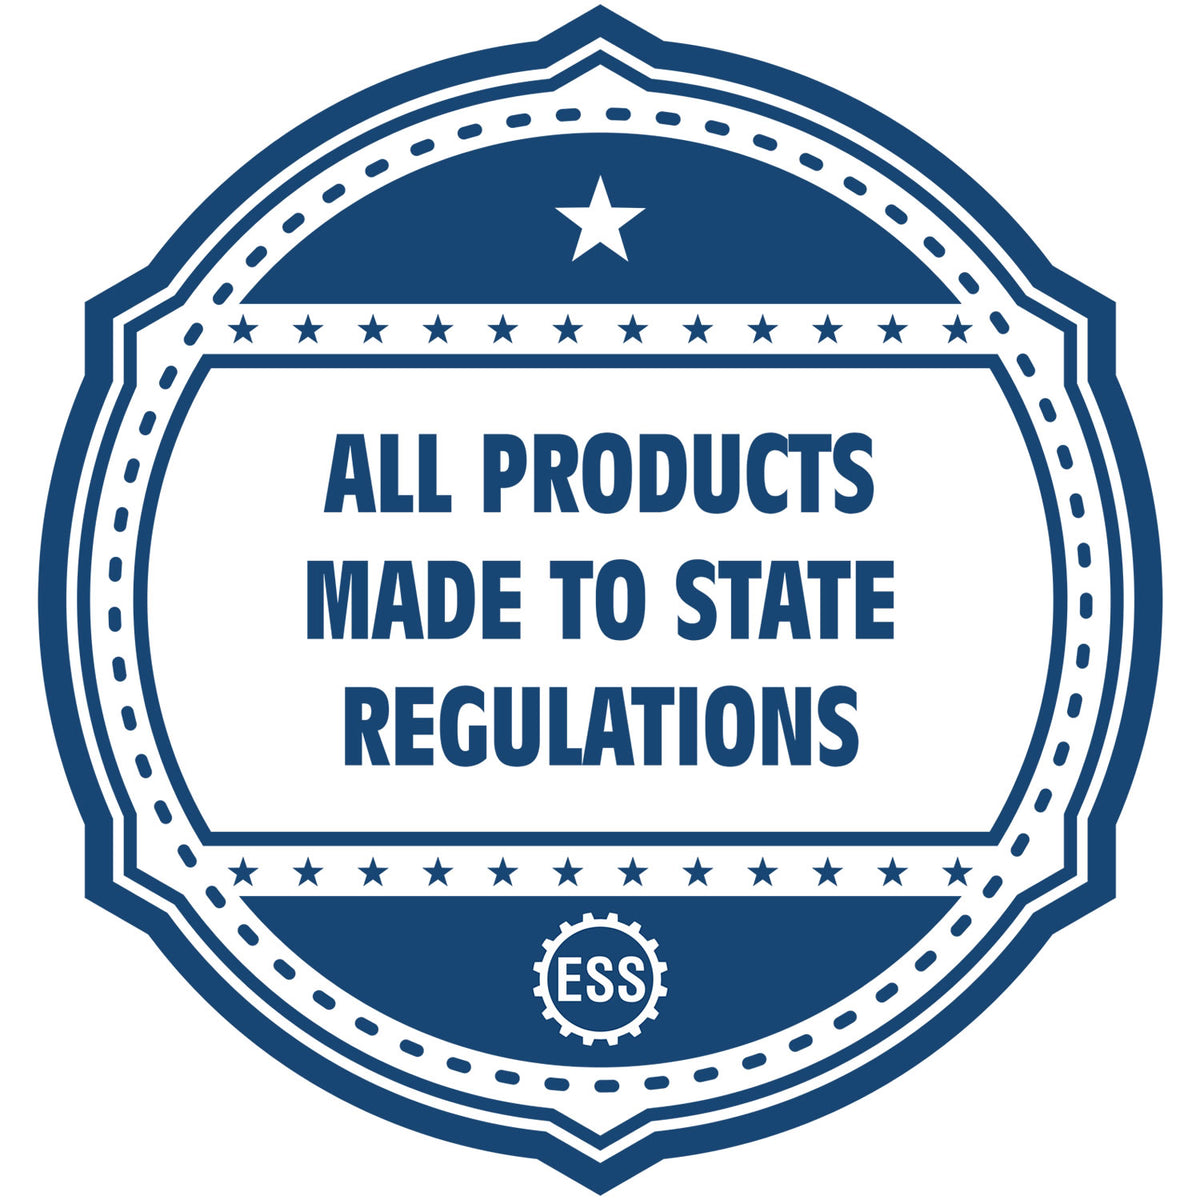 A blue icon or badge for the Gift West Virginia Architect Seal showing that this product is made in compliance with state regulations.